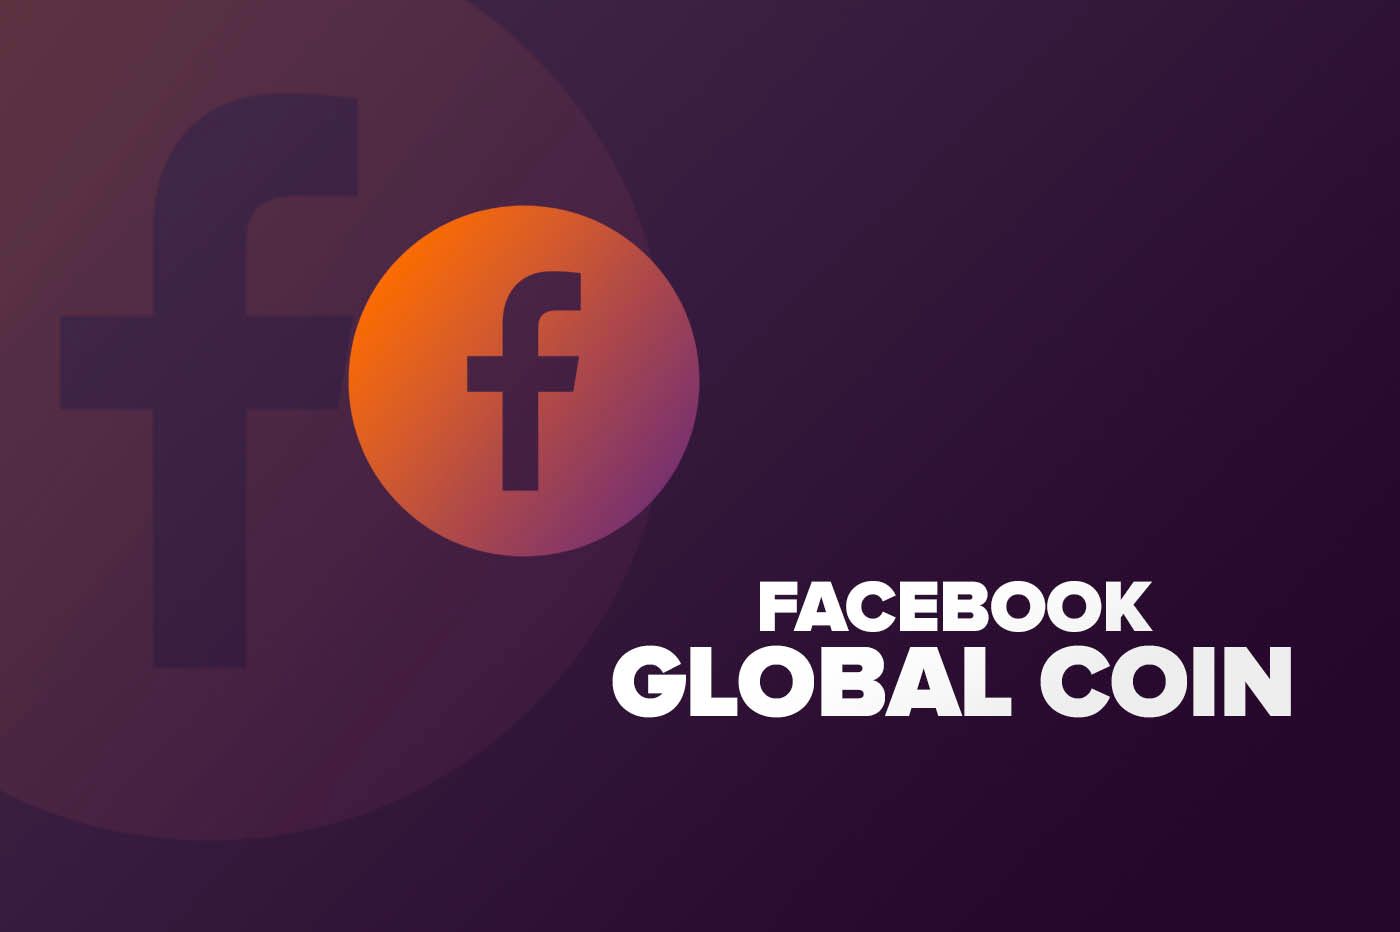 Article All You Need to Know about Facebook Global Coin